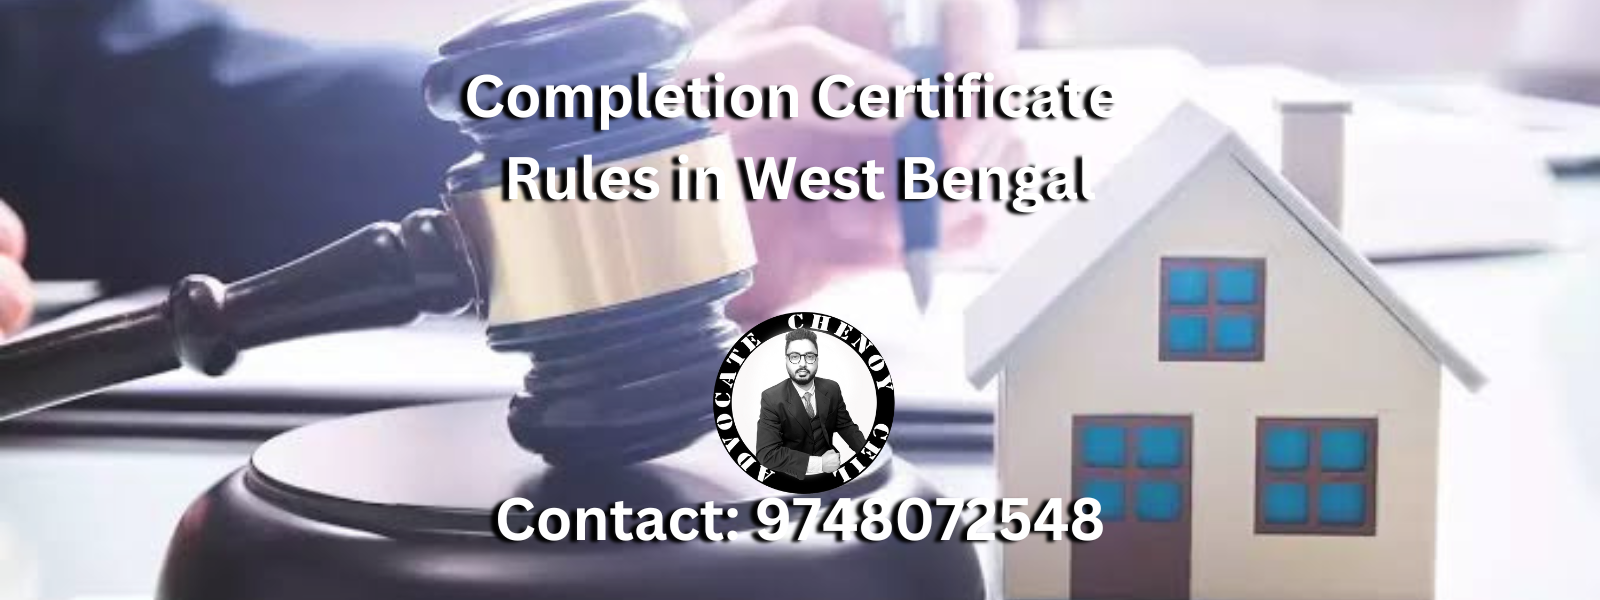 Completion Certificate Rules in West Bengal